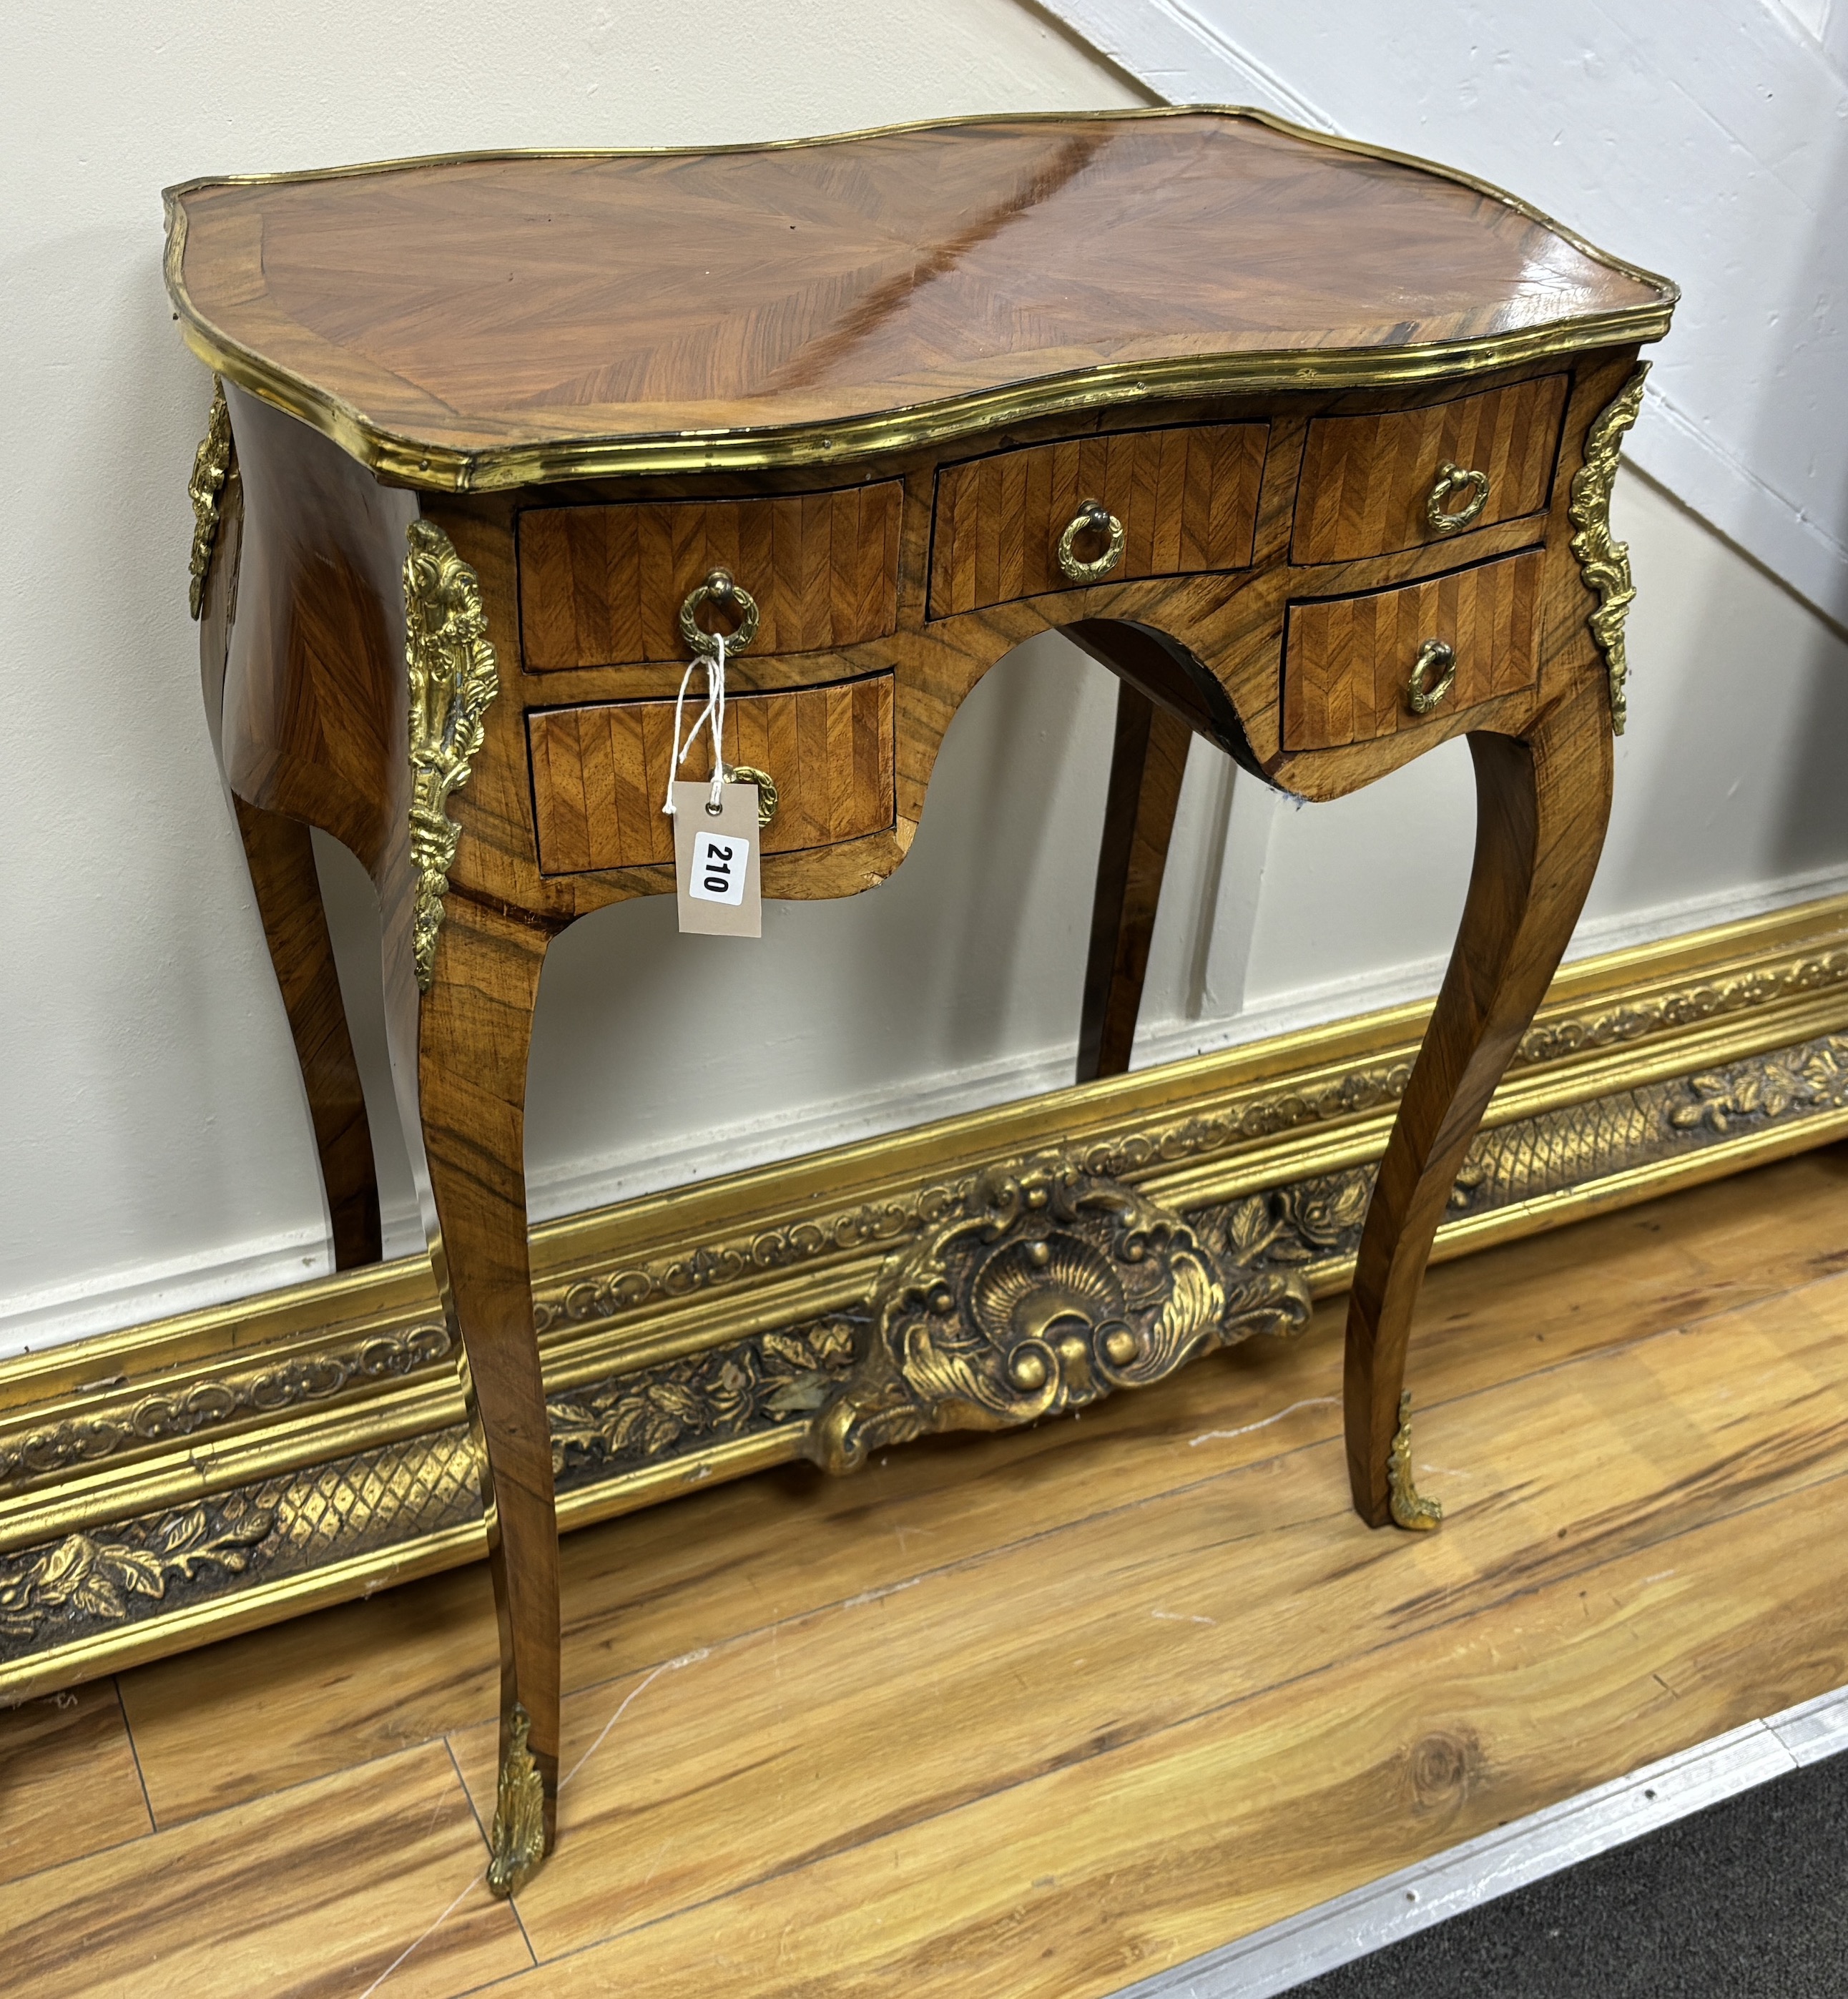 A French gilt metal mounted kingwood side table, width 67cm, depth 42cm, height 78cm